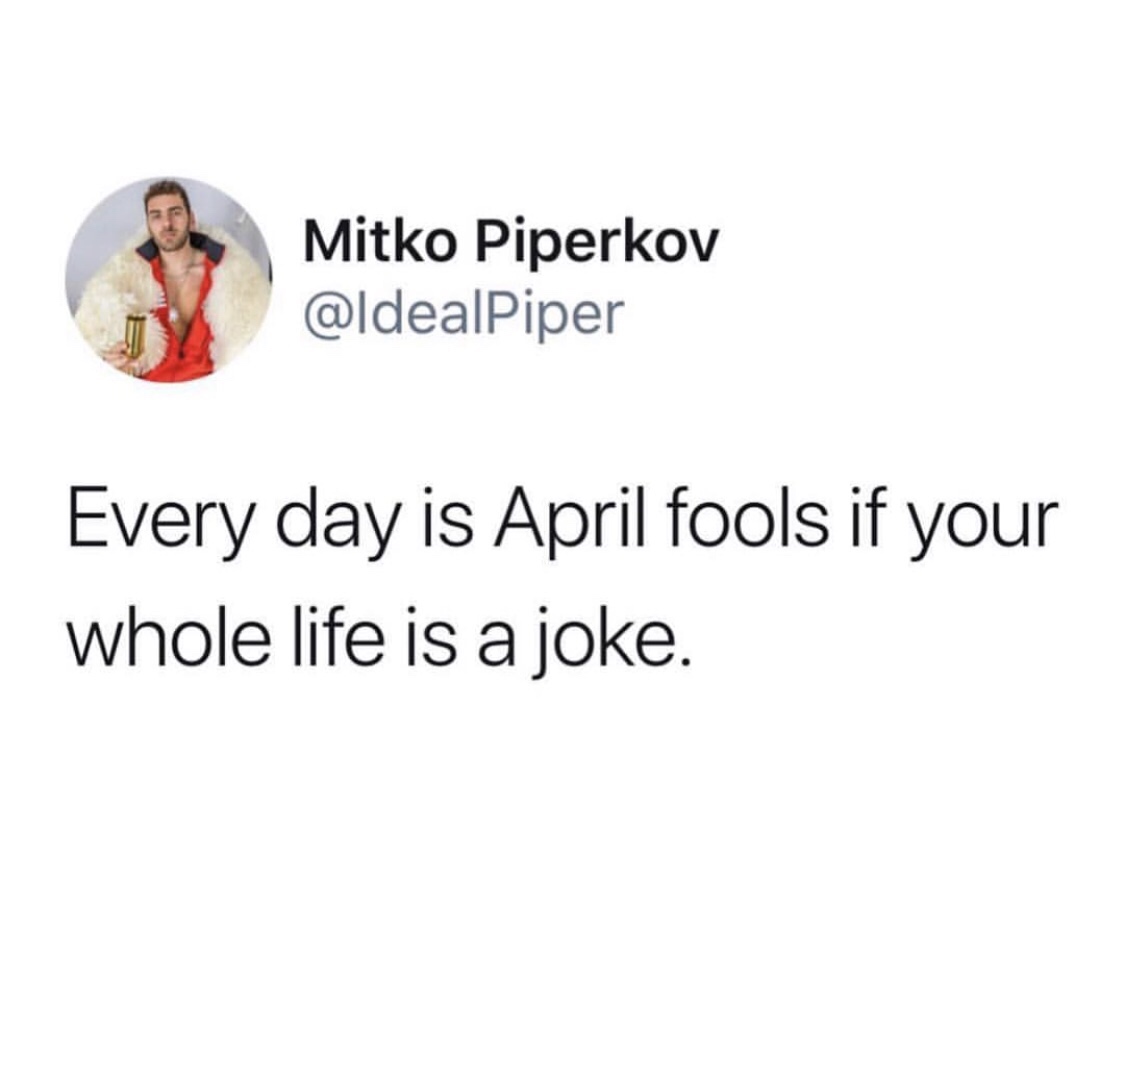 organization - Mitko Piperkov Every day is April fools if your whole life is a joke.